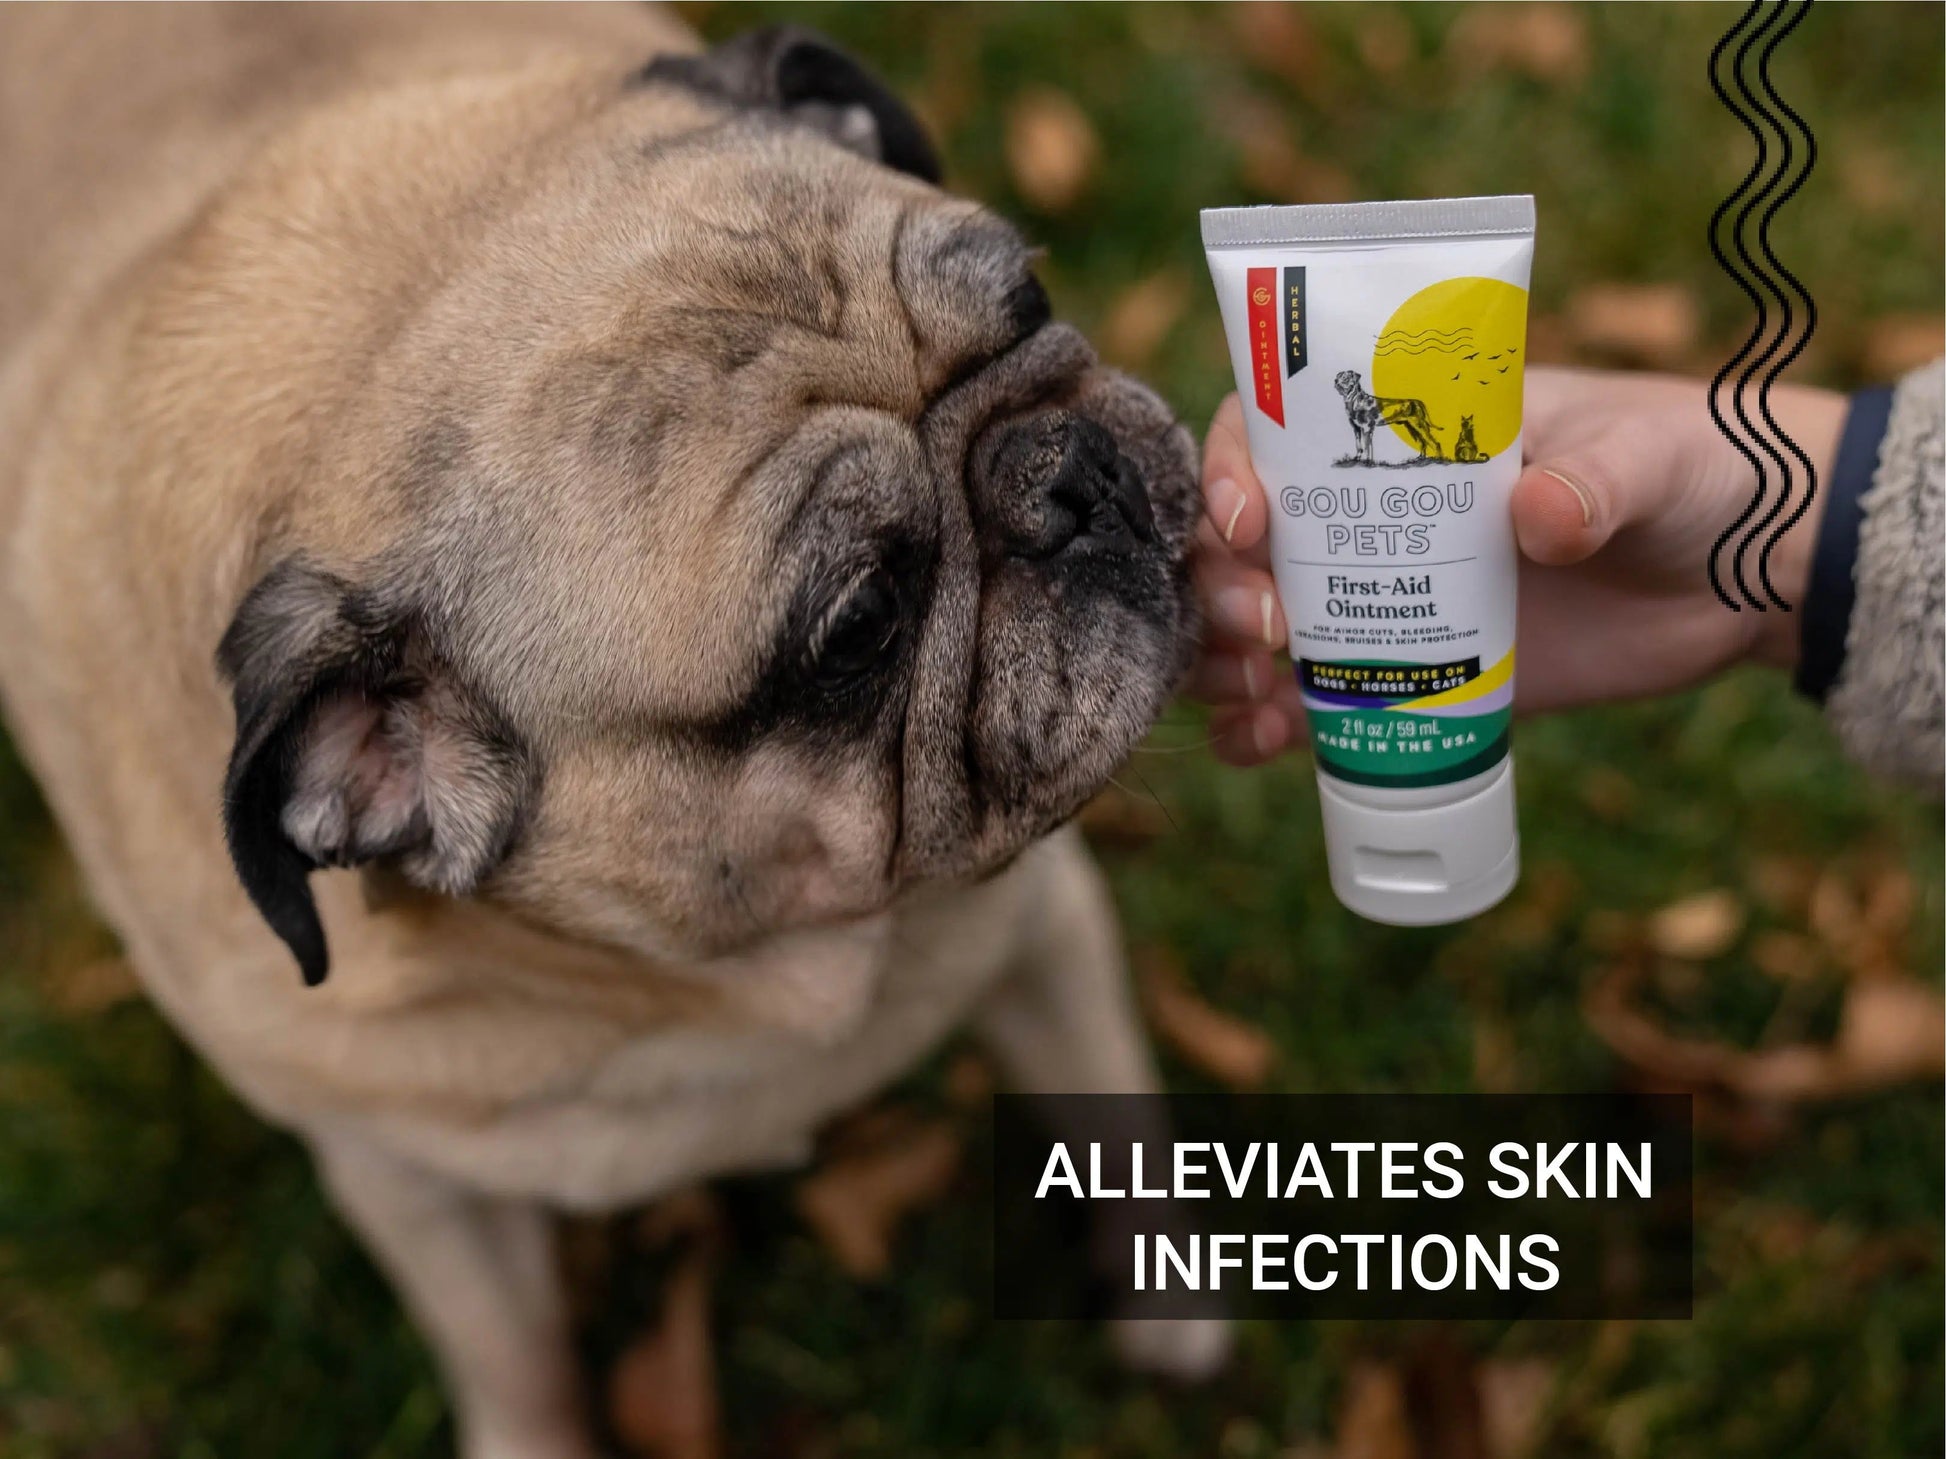 First Aid Ointment For Cats & Dogs - For Minor Cuts, Bleeding & Bruises Pet Supplies Gou Gou Pets 